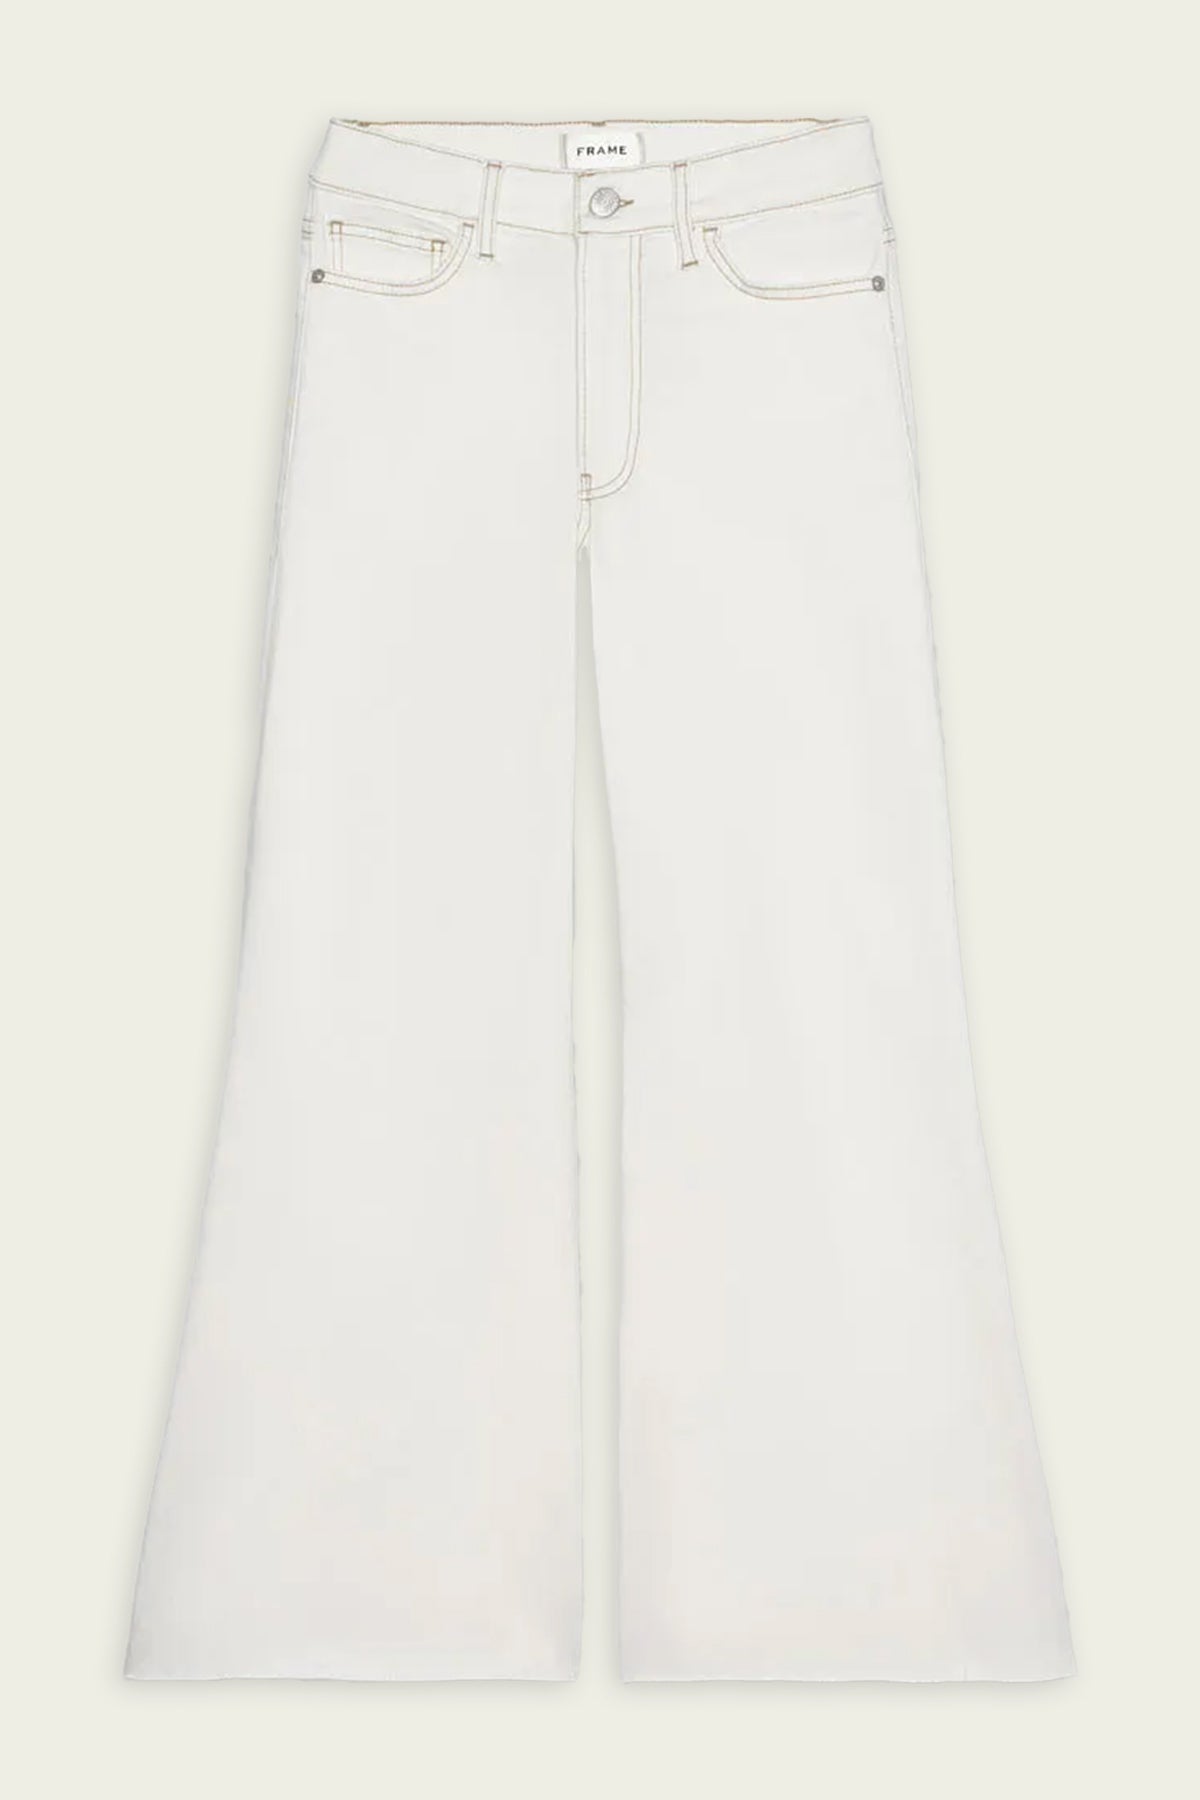 Le Palazzo Crop Raw Fray in Au Natural Clean - shop-olivia.com